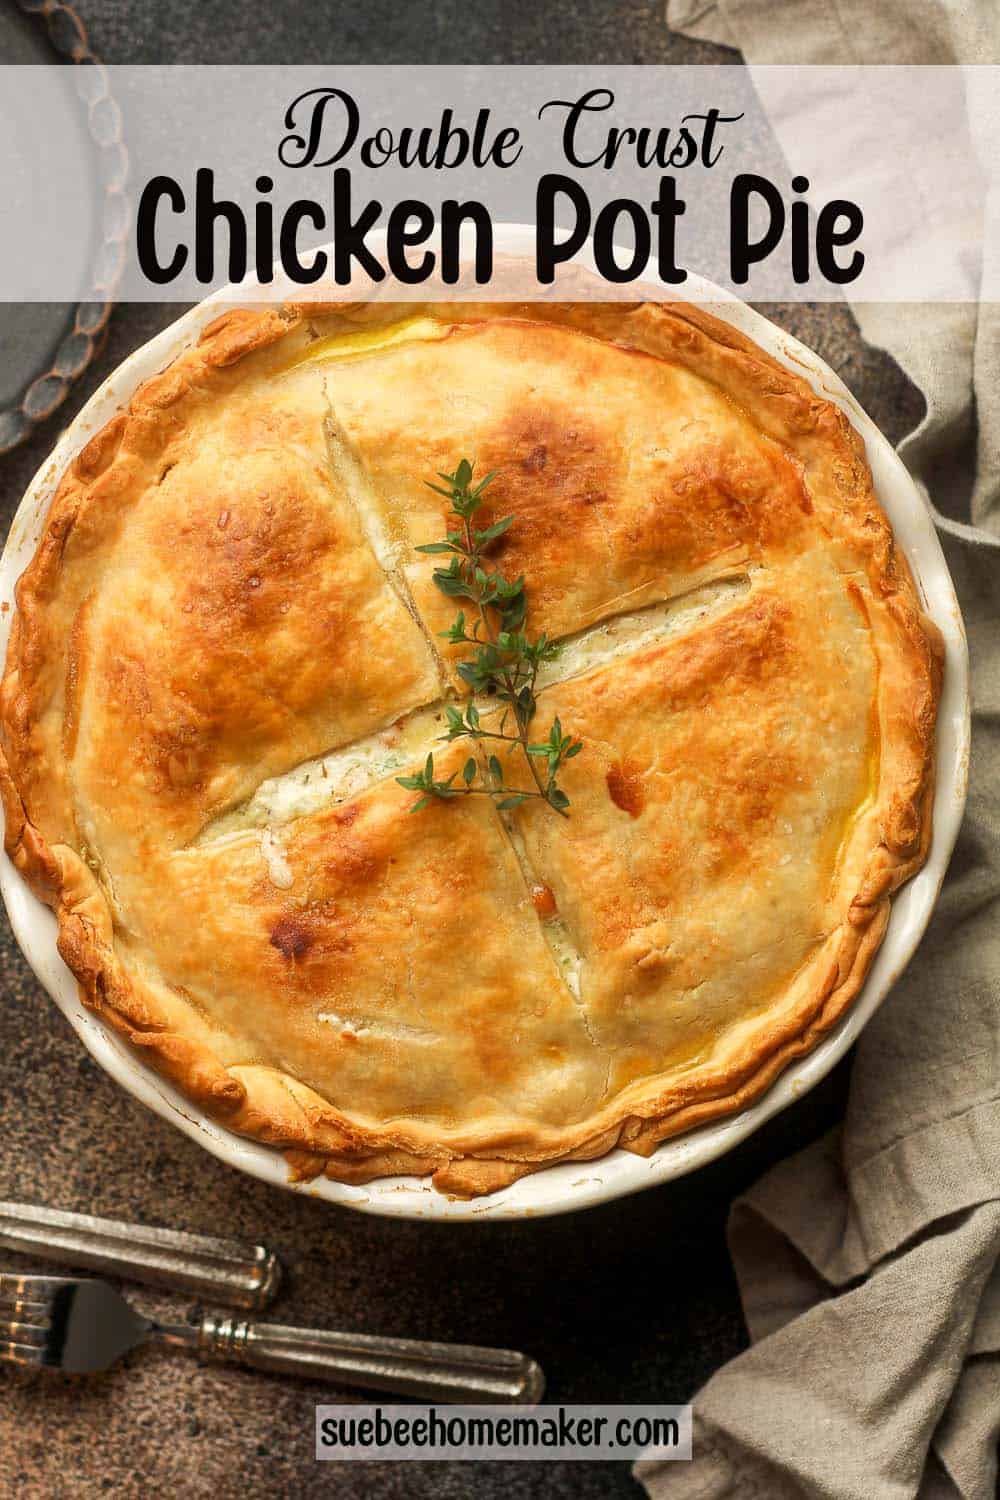 A white pie plate with a whole double crust chicken pot pie.